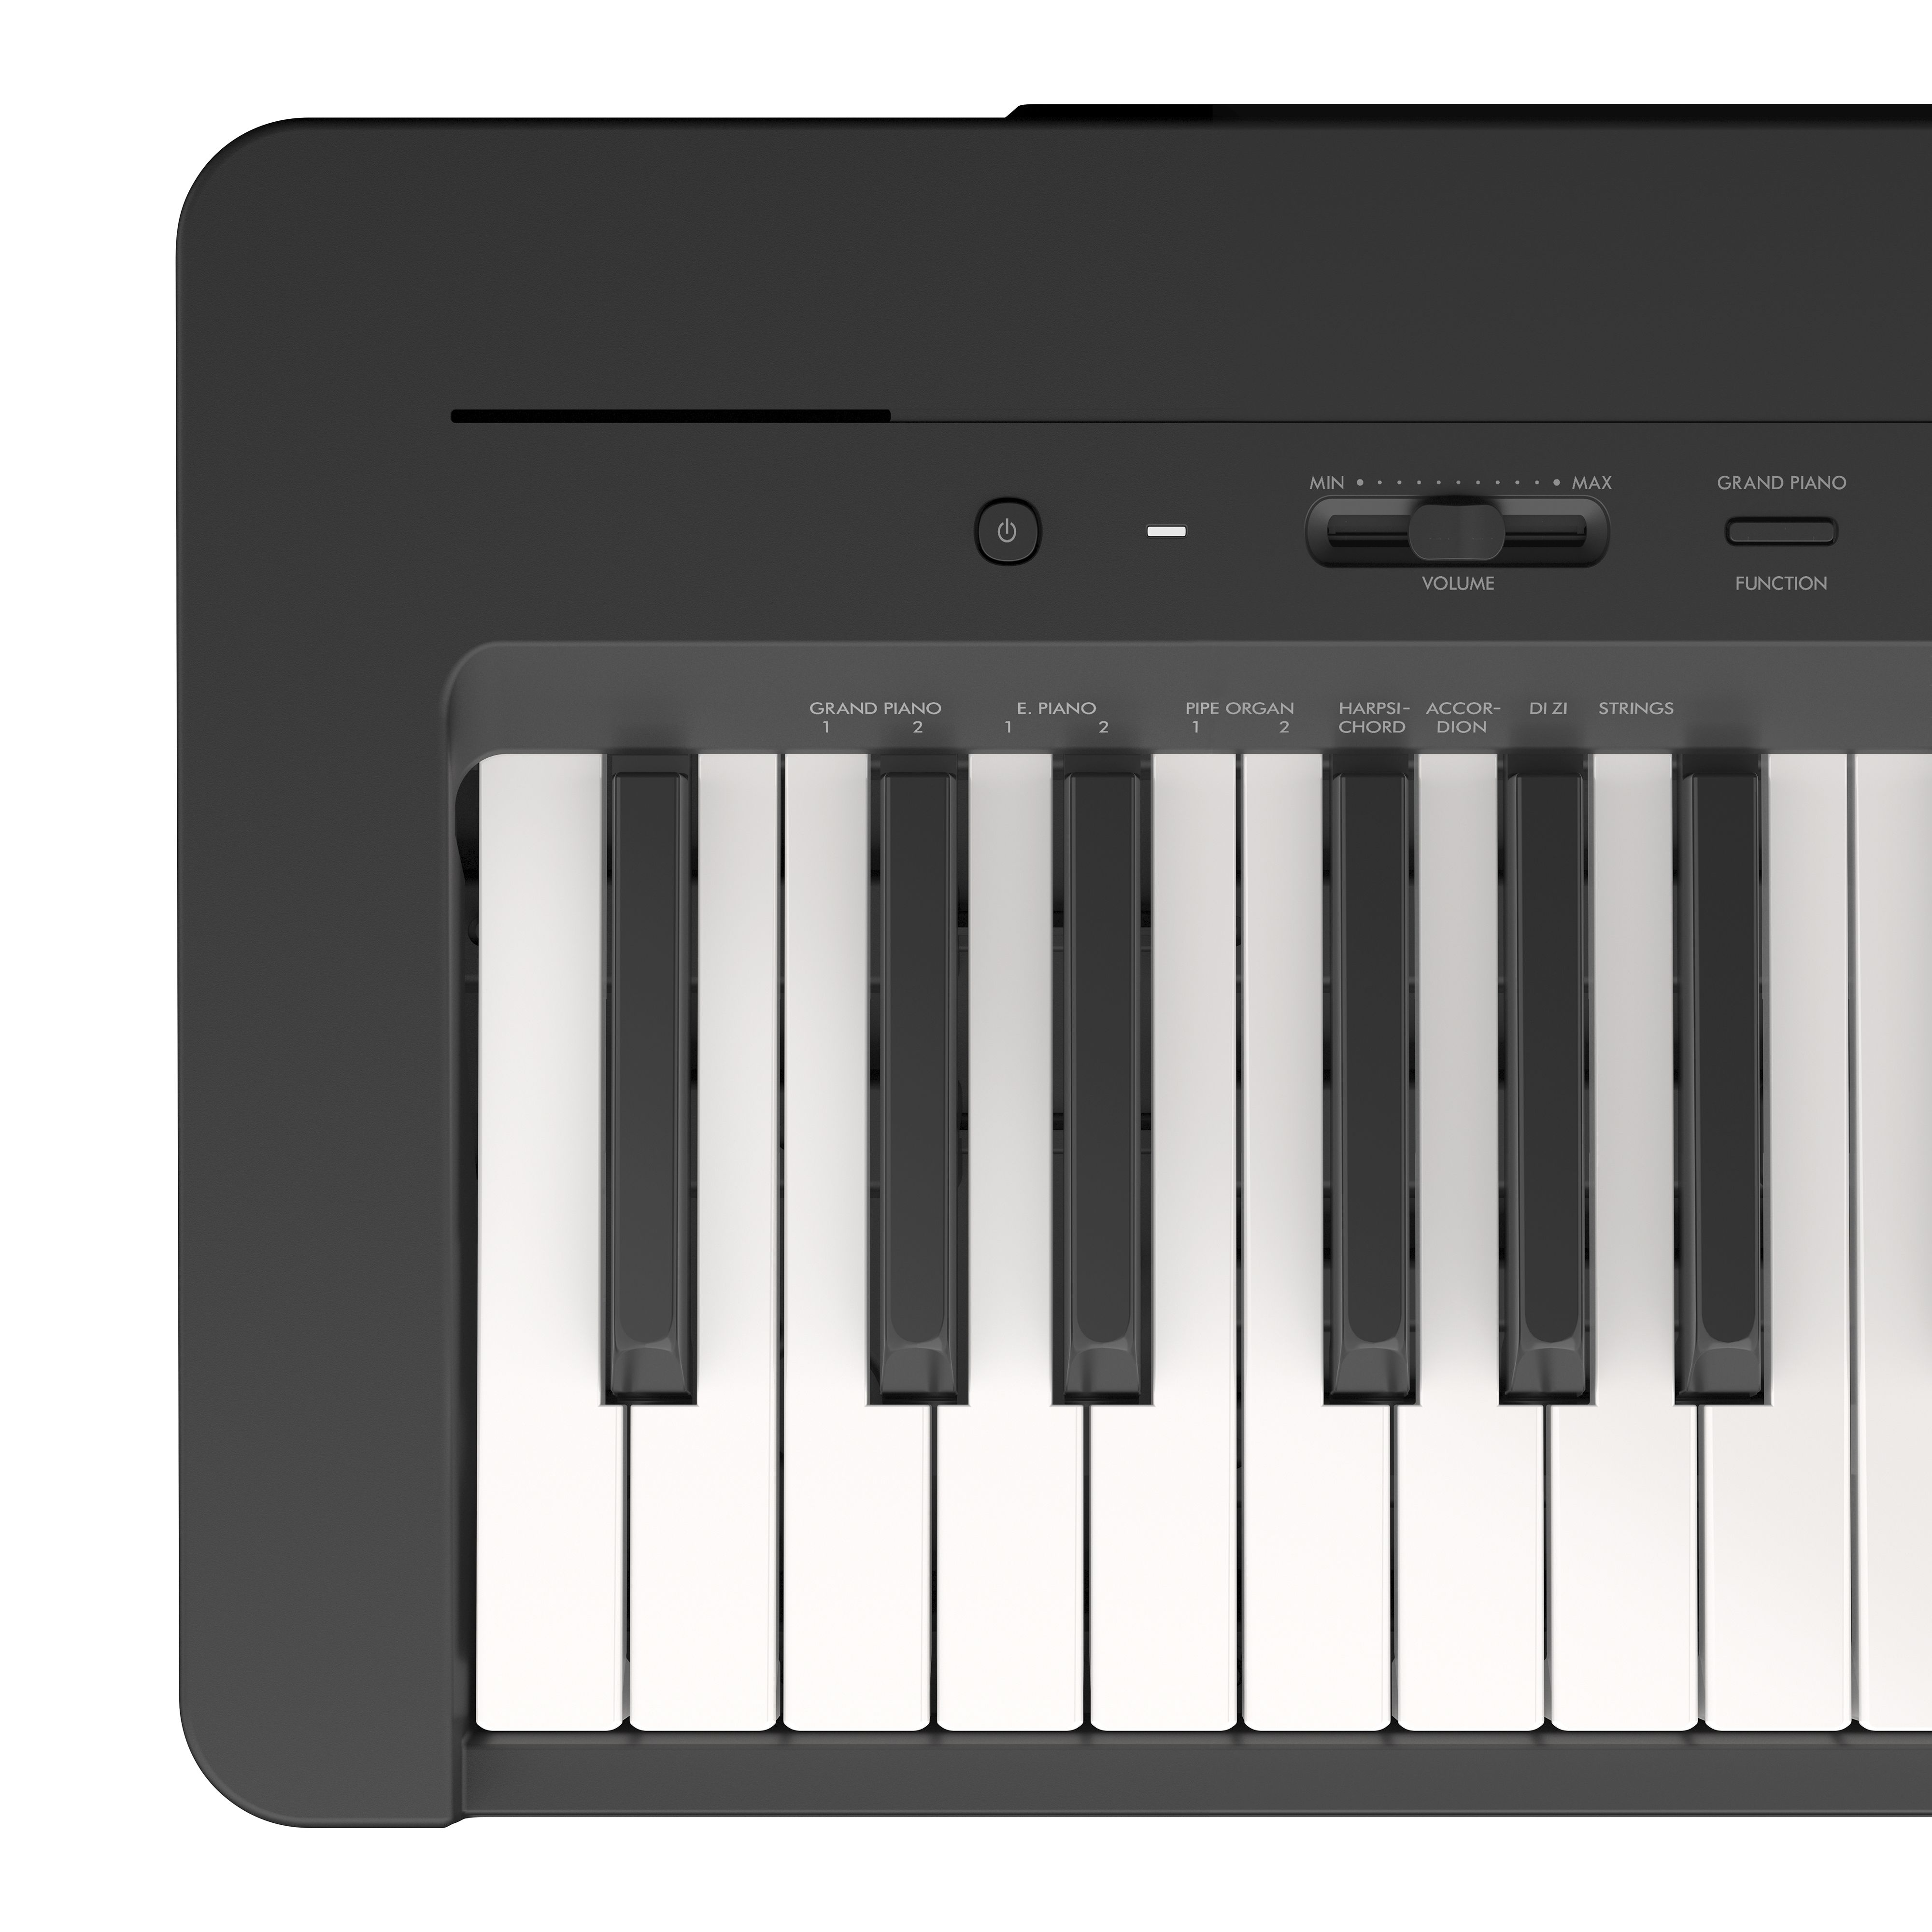 P-145 - Musical European - P Yamaha Overview - Pianos - Products - Series - Instruments Other Countries 